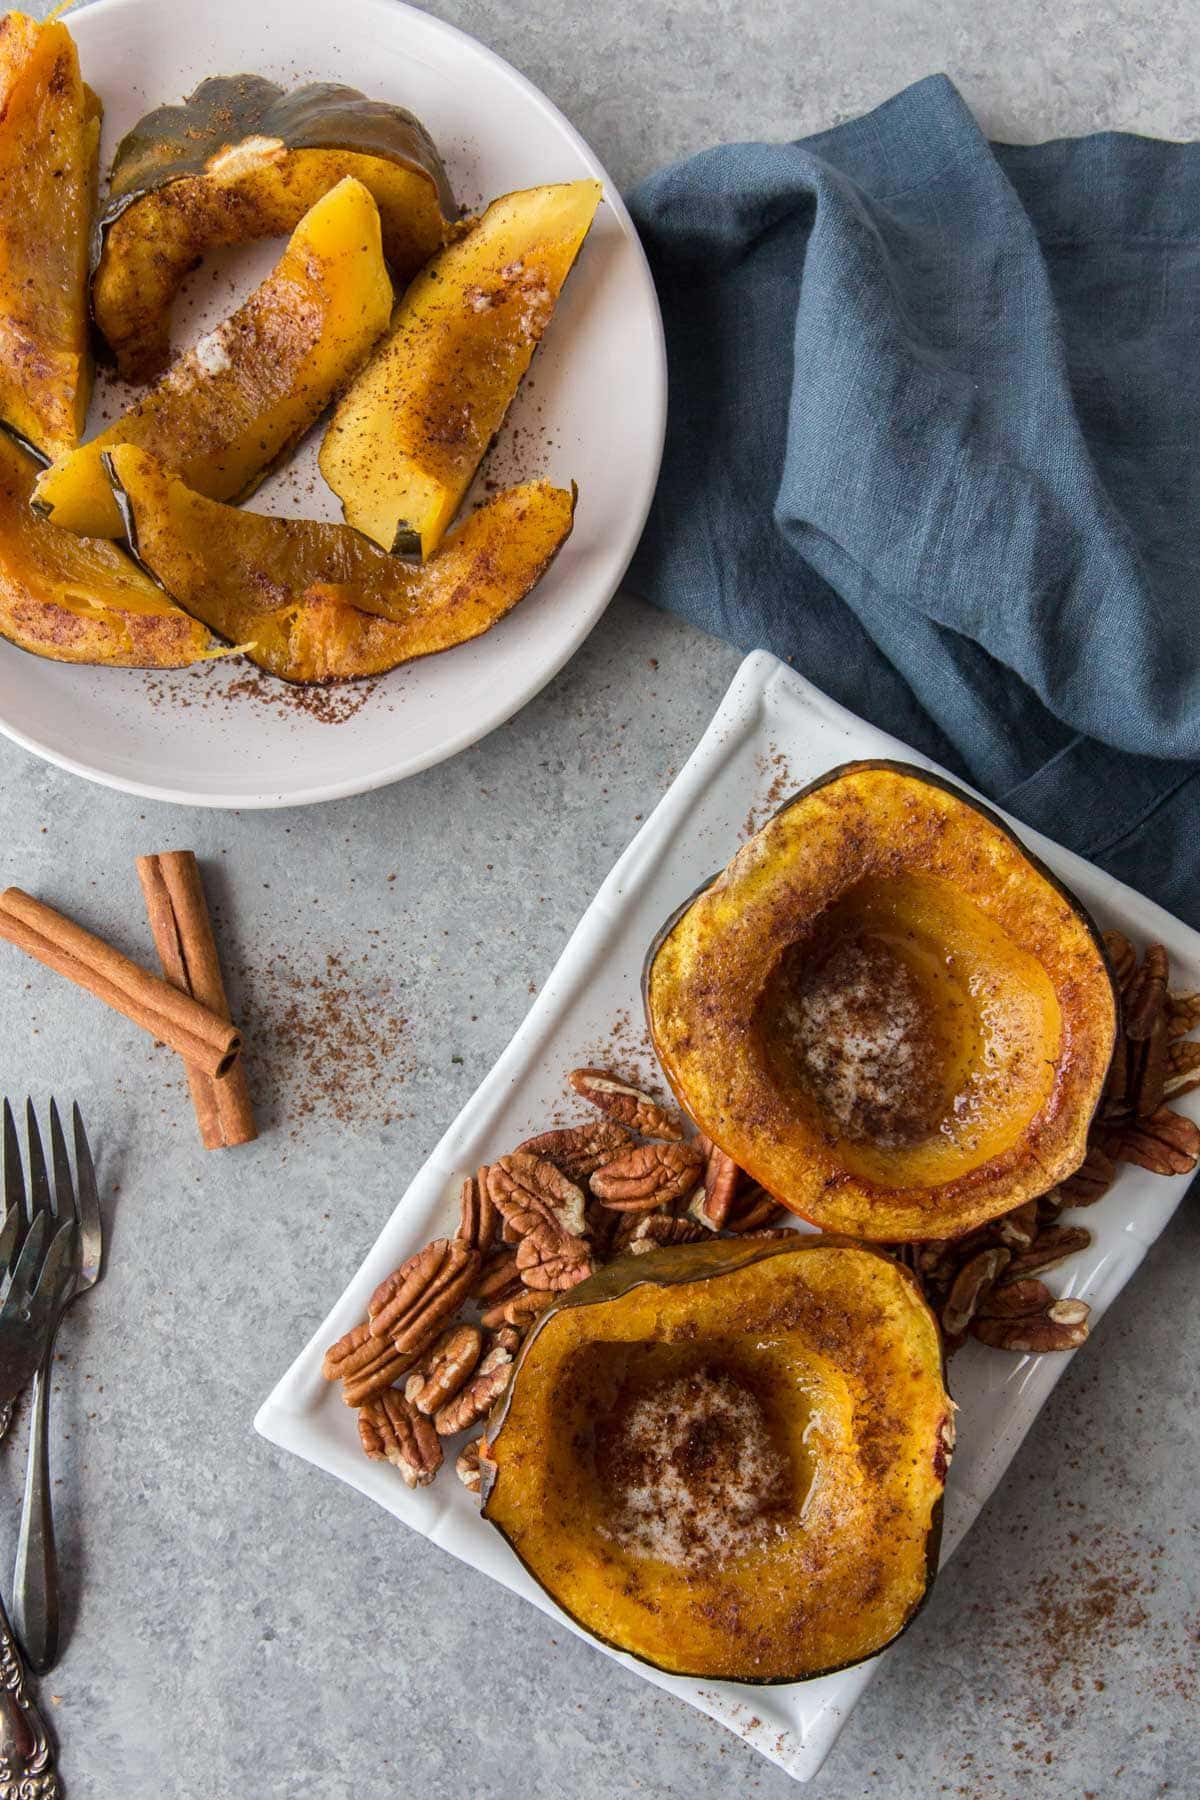 Baked acorn squash halves topped with butter, syrup and cinnamon